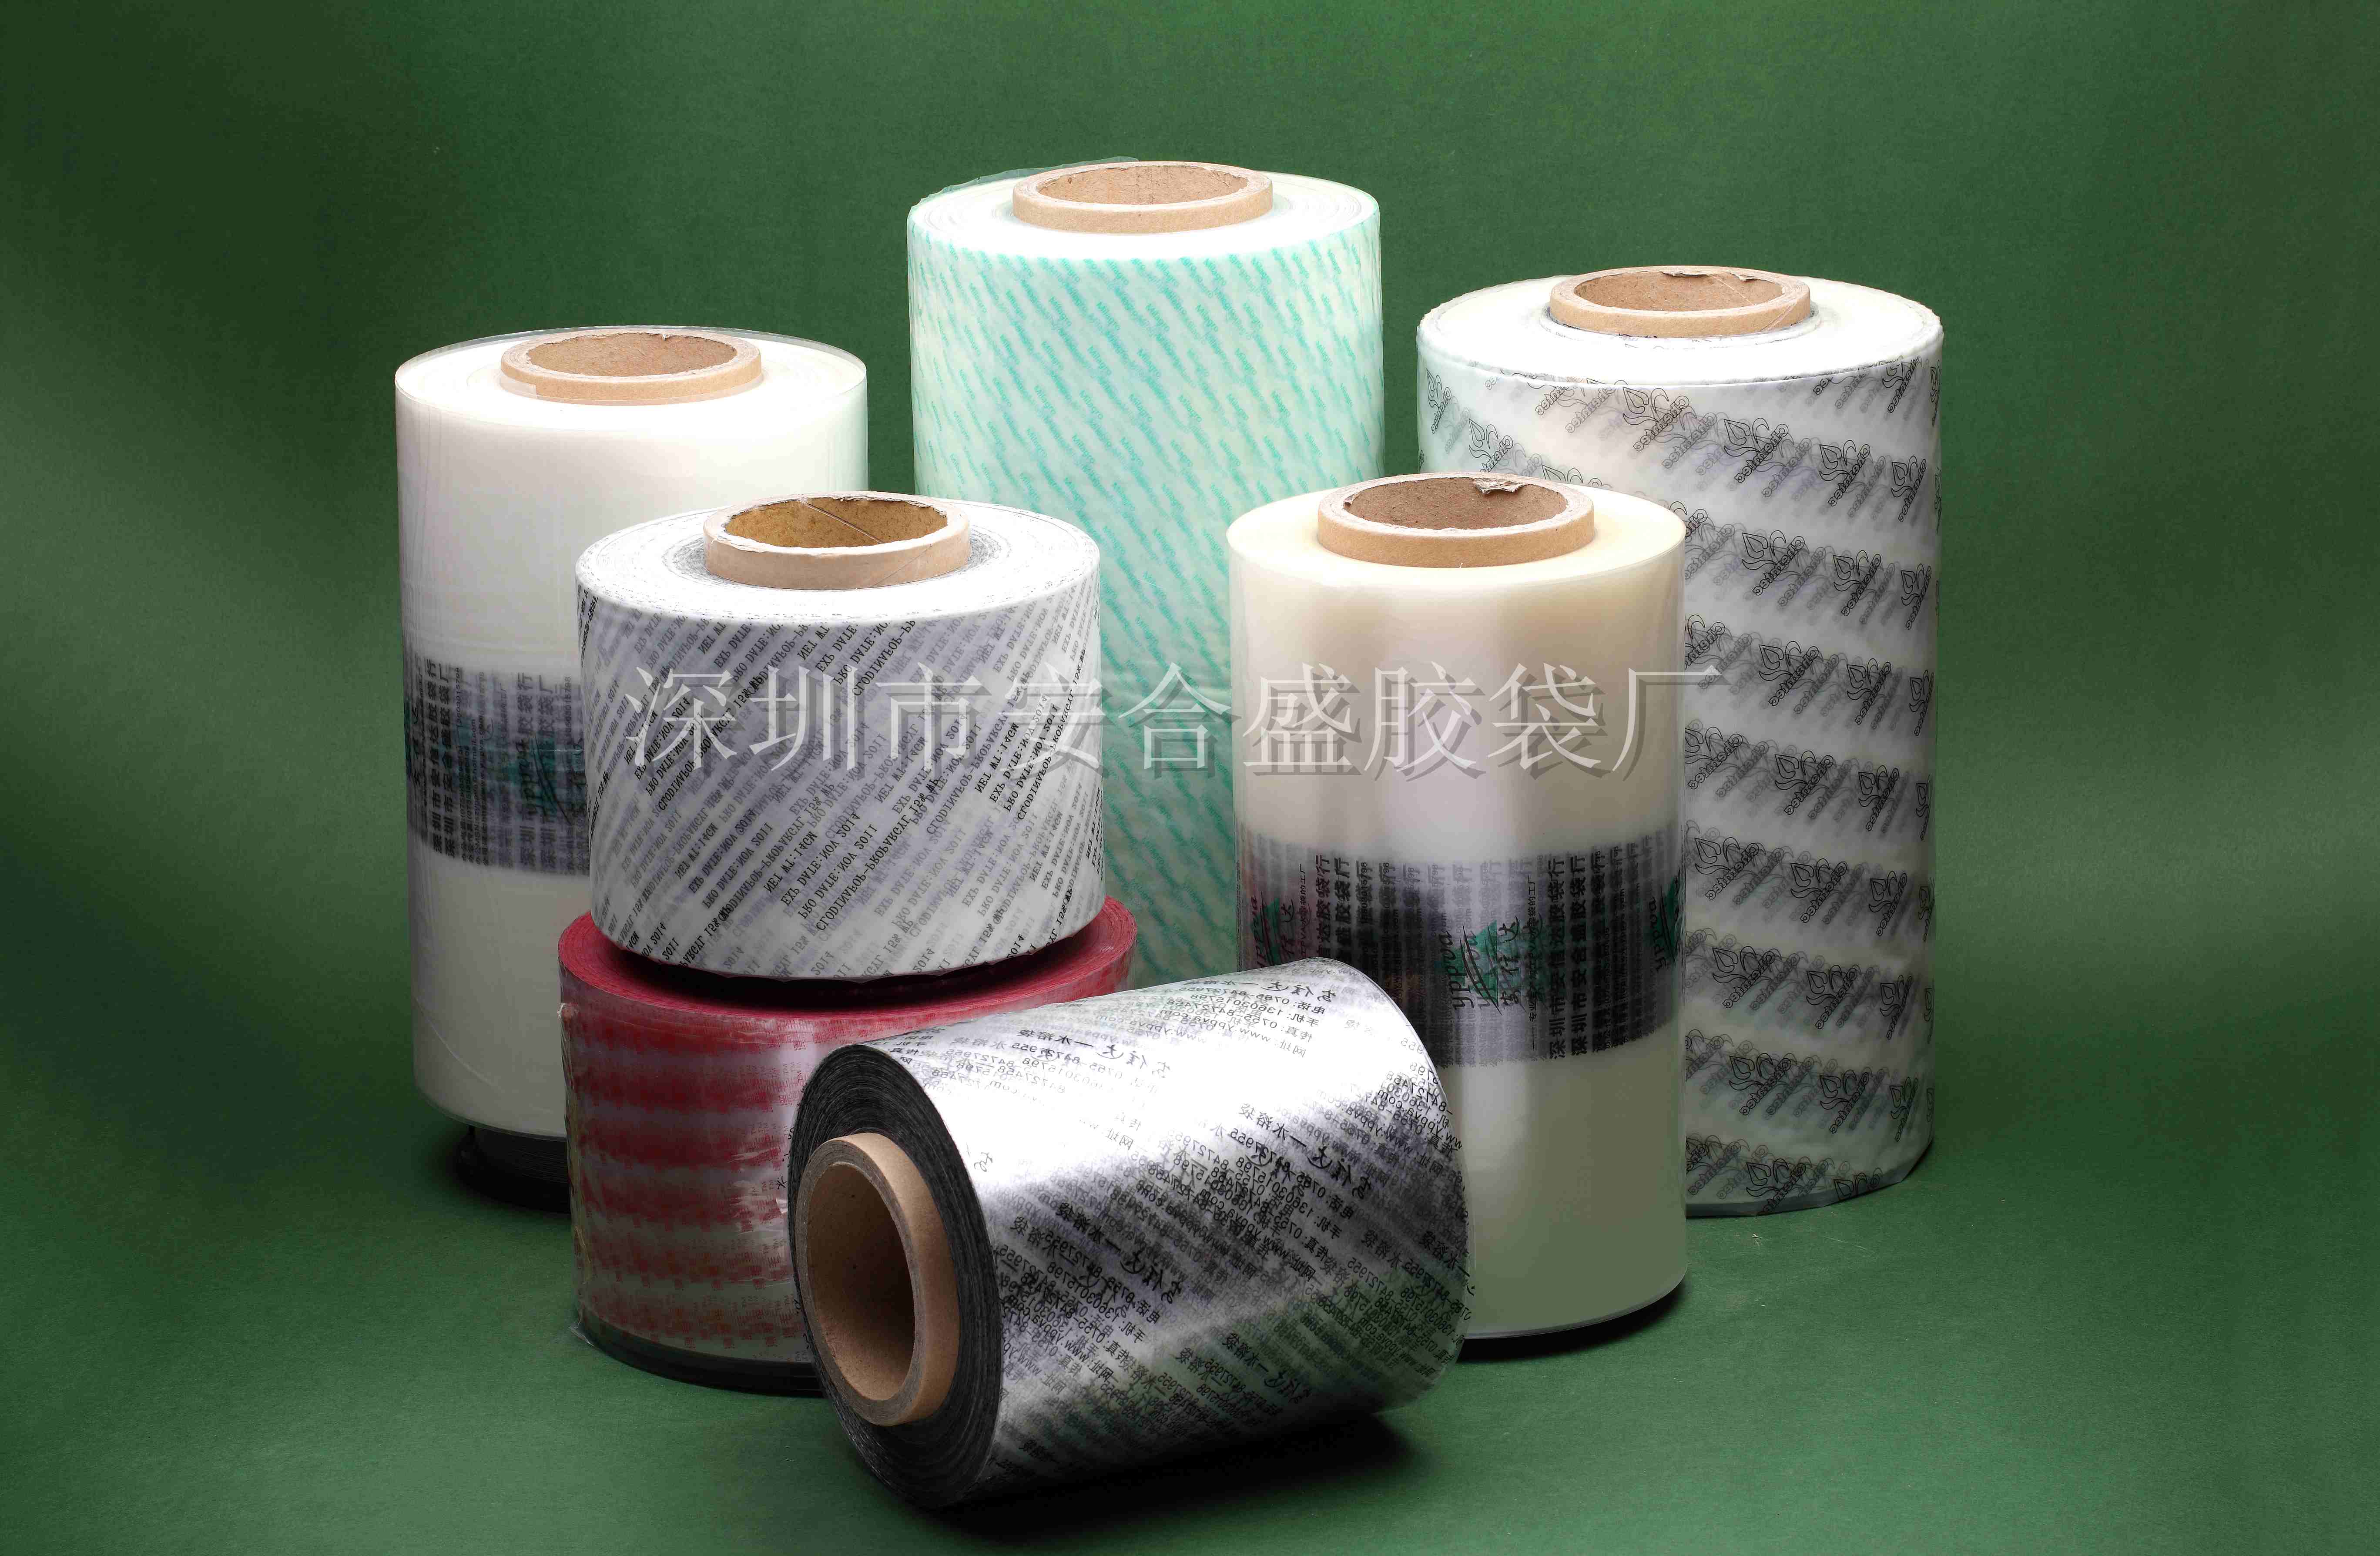 Water soluble film